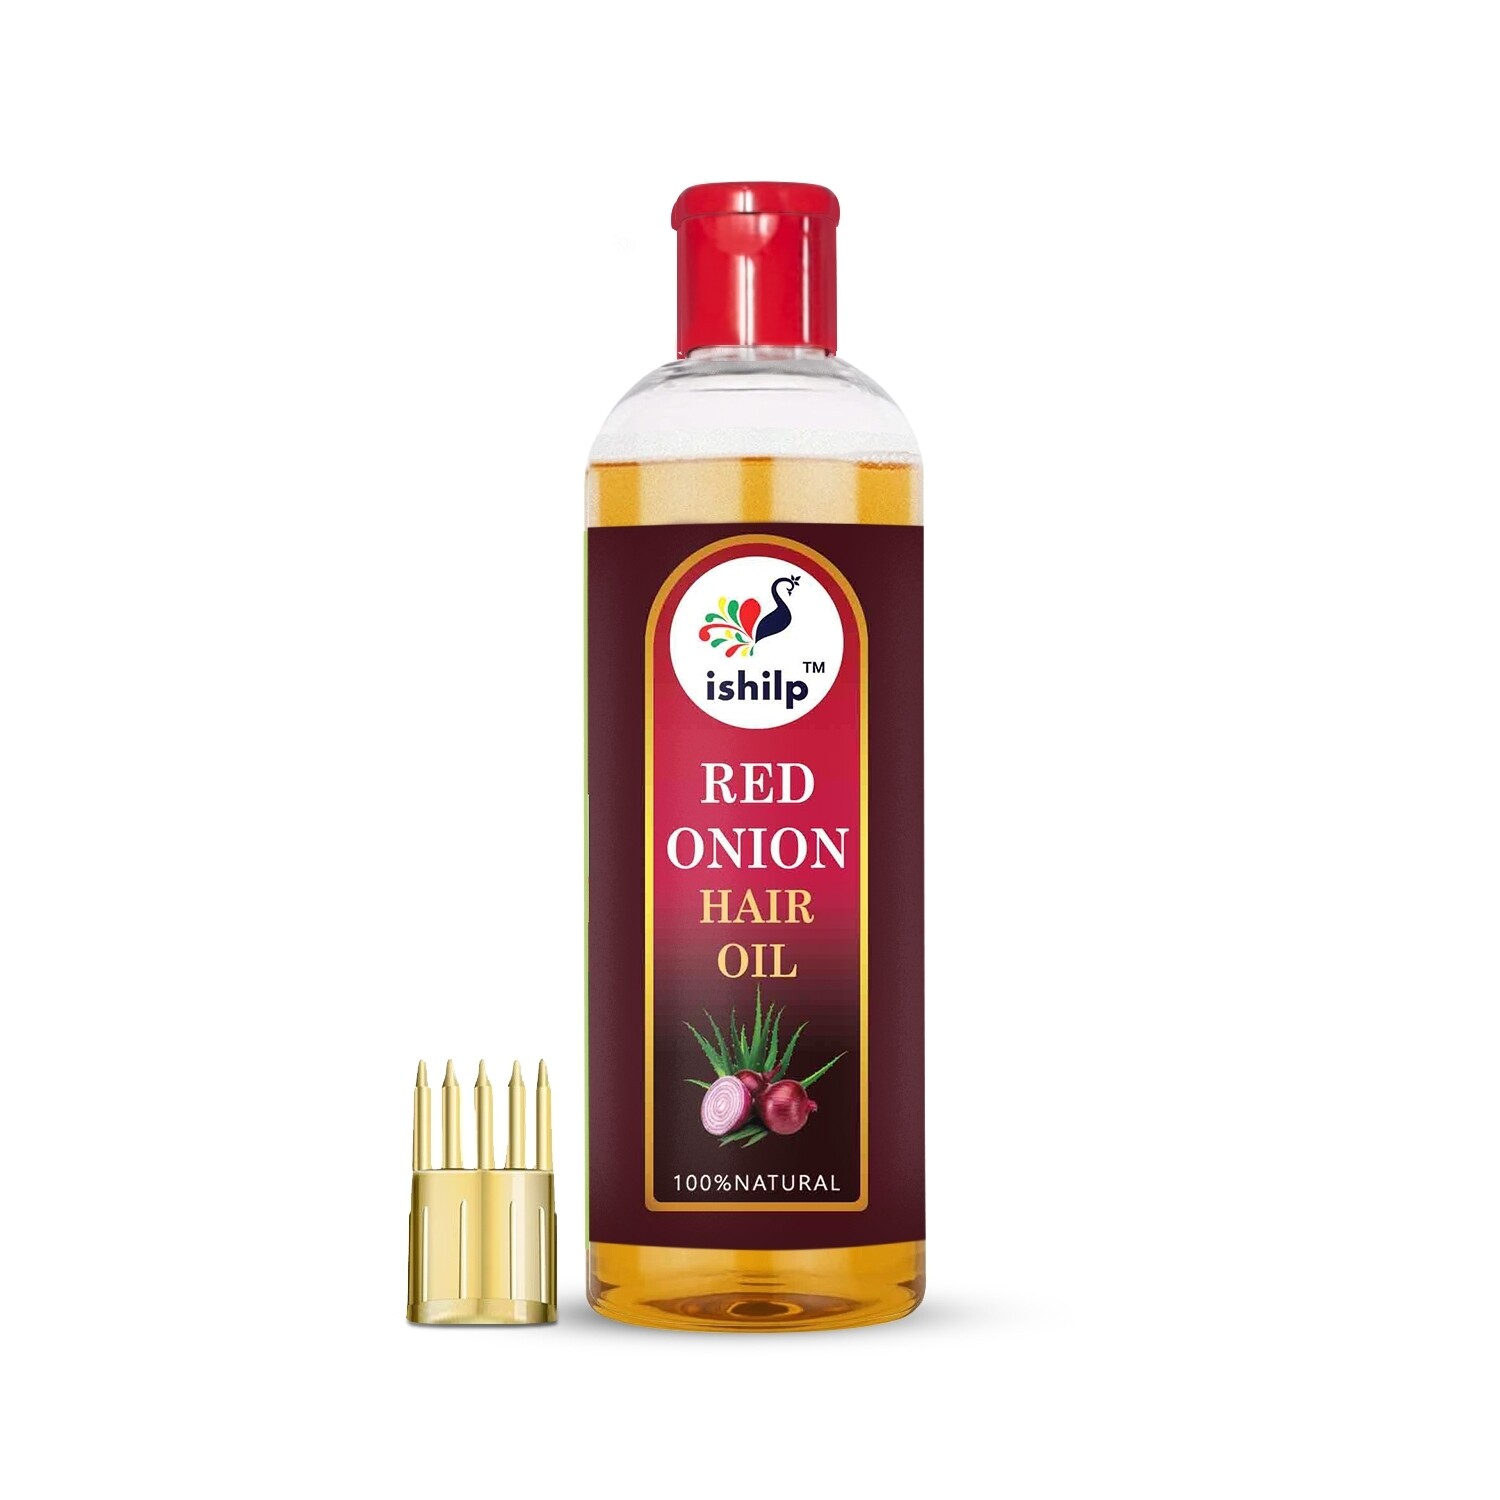 Organic Products  Organic Food  Organic online Store  Organic Food  Products in HyderabadBangloreIndiaOnline  Organicmela  Organic  Organic Red Onion Hair Oil